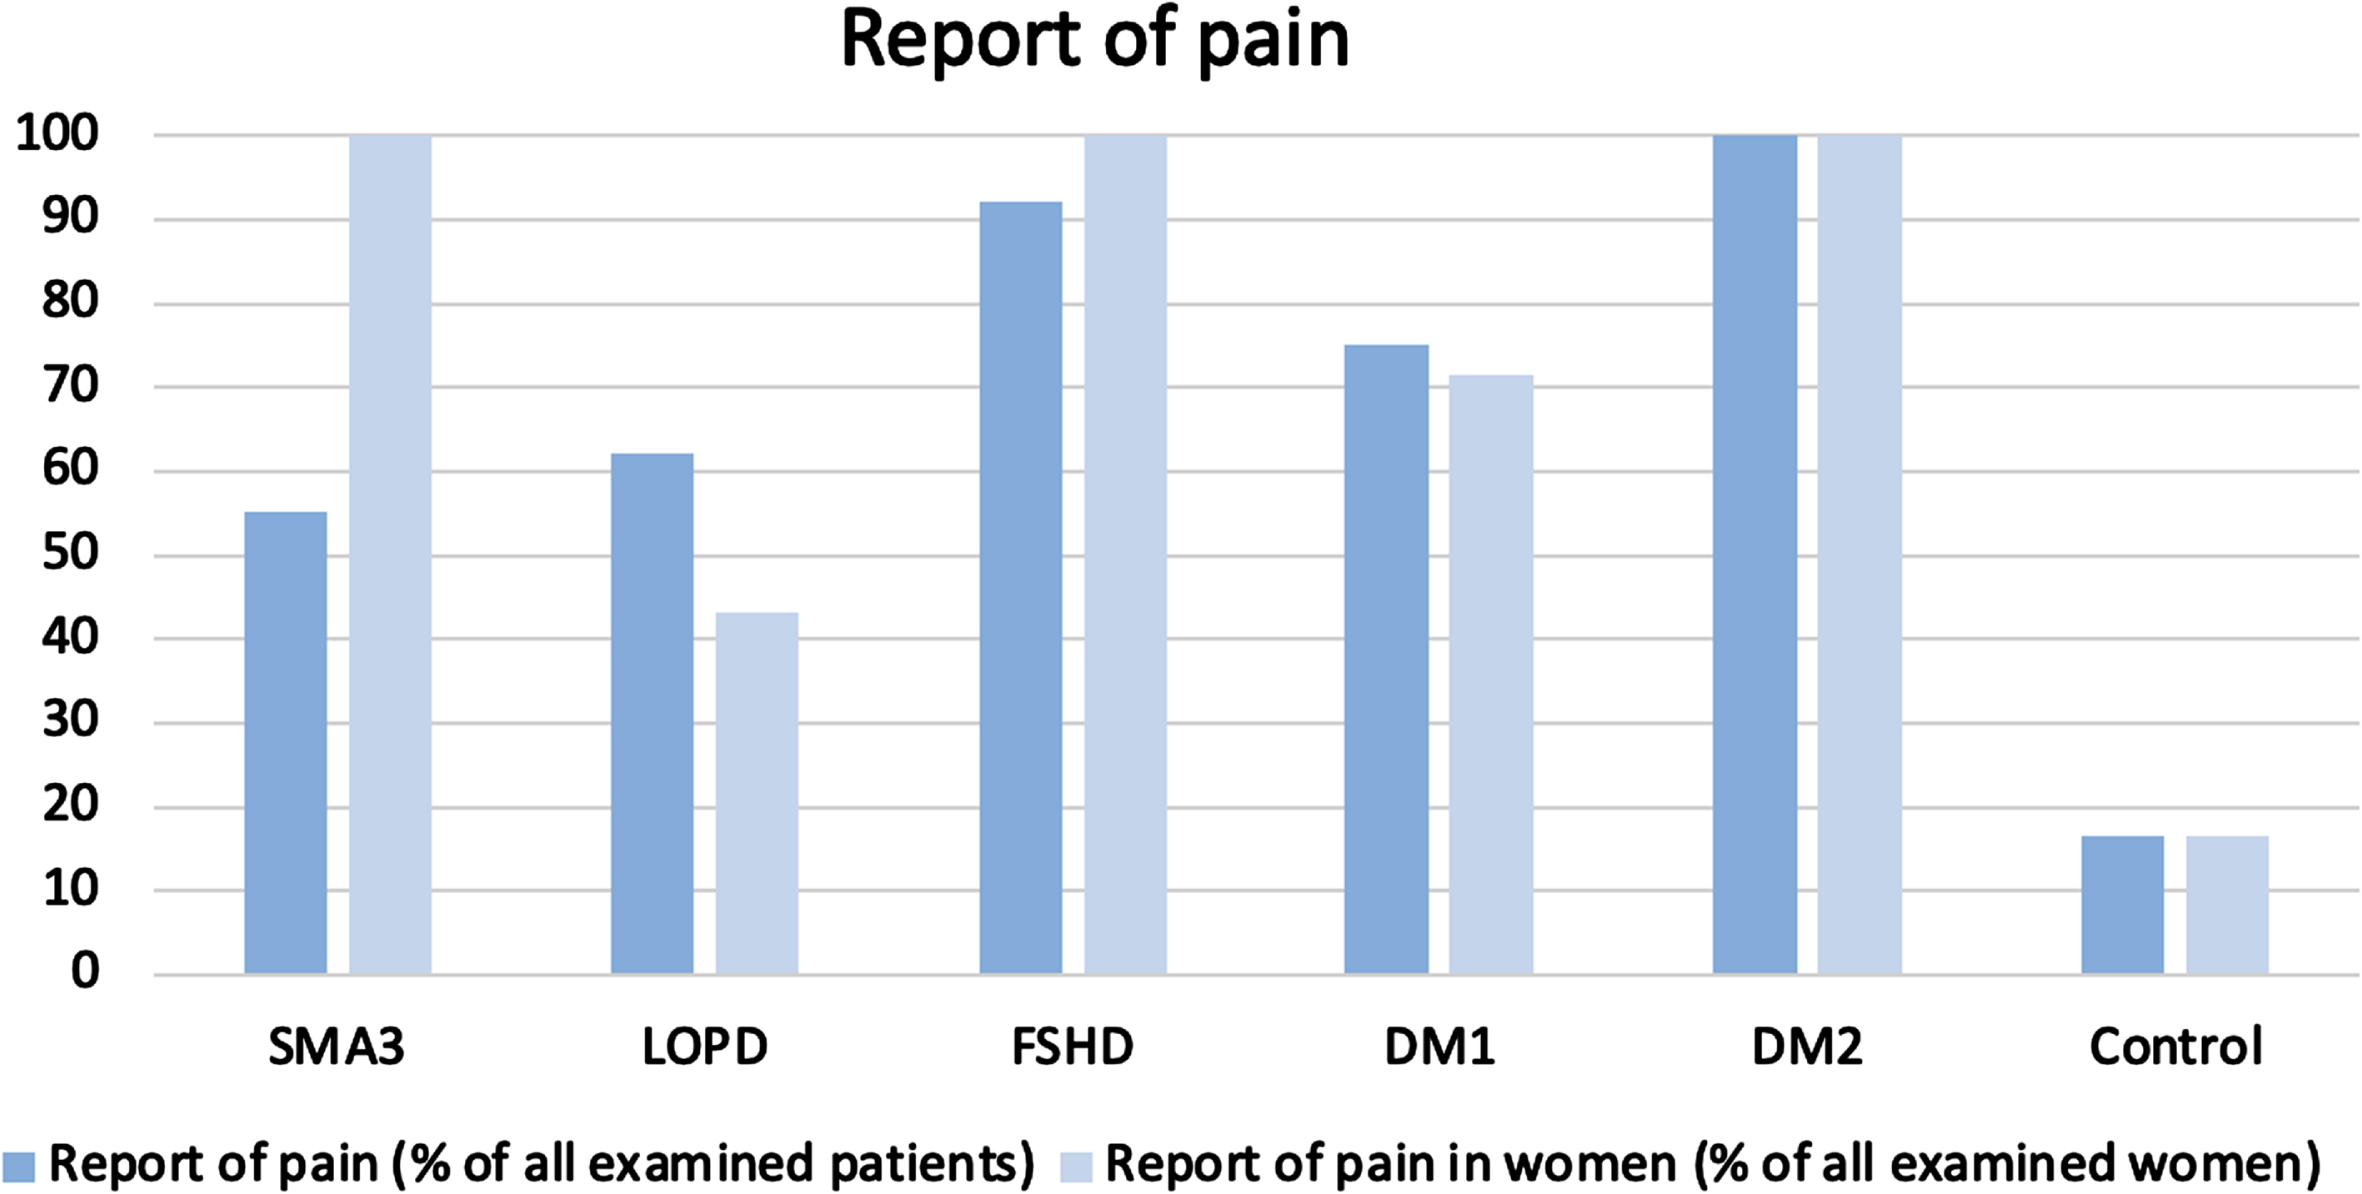 Report of pain. Percentage of subjective pain prevalence in all examined patients and in all examined women. The report of pain was significantly (p = <0.01 **) higher in DM1, DM2, and FSHD patients compared to the control group.